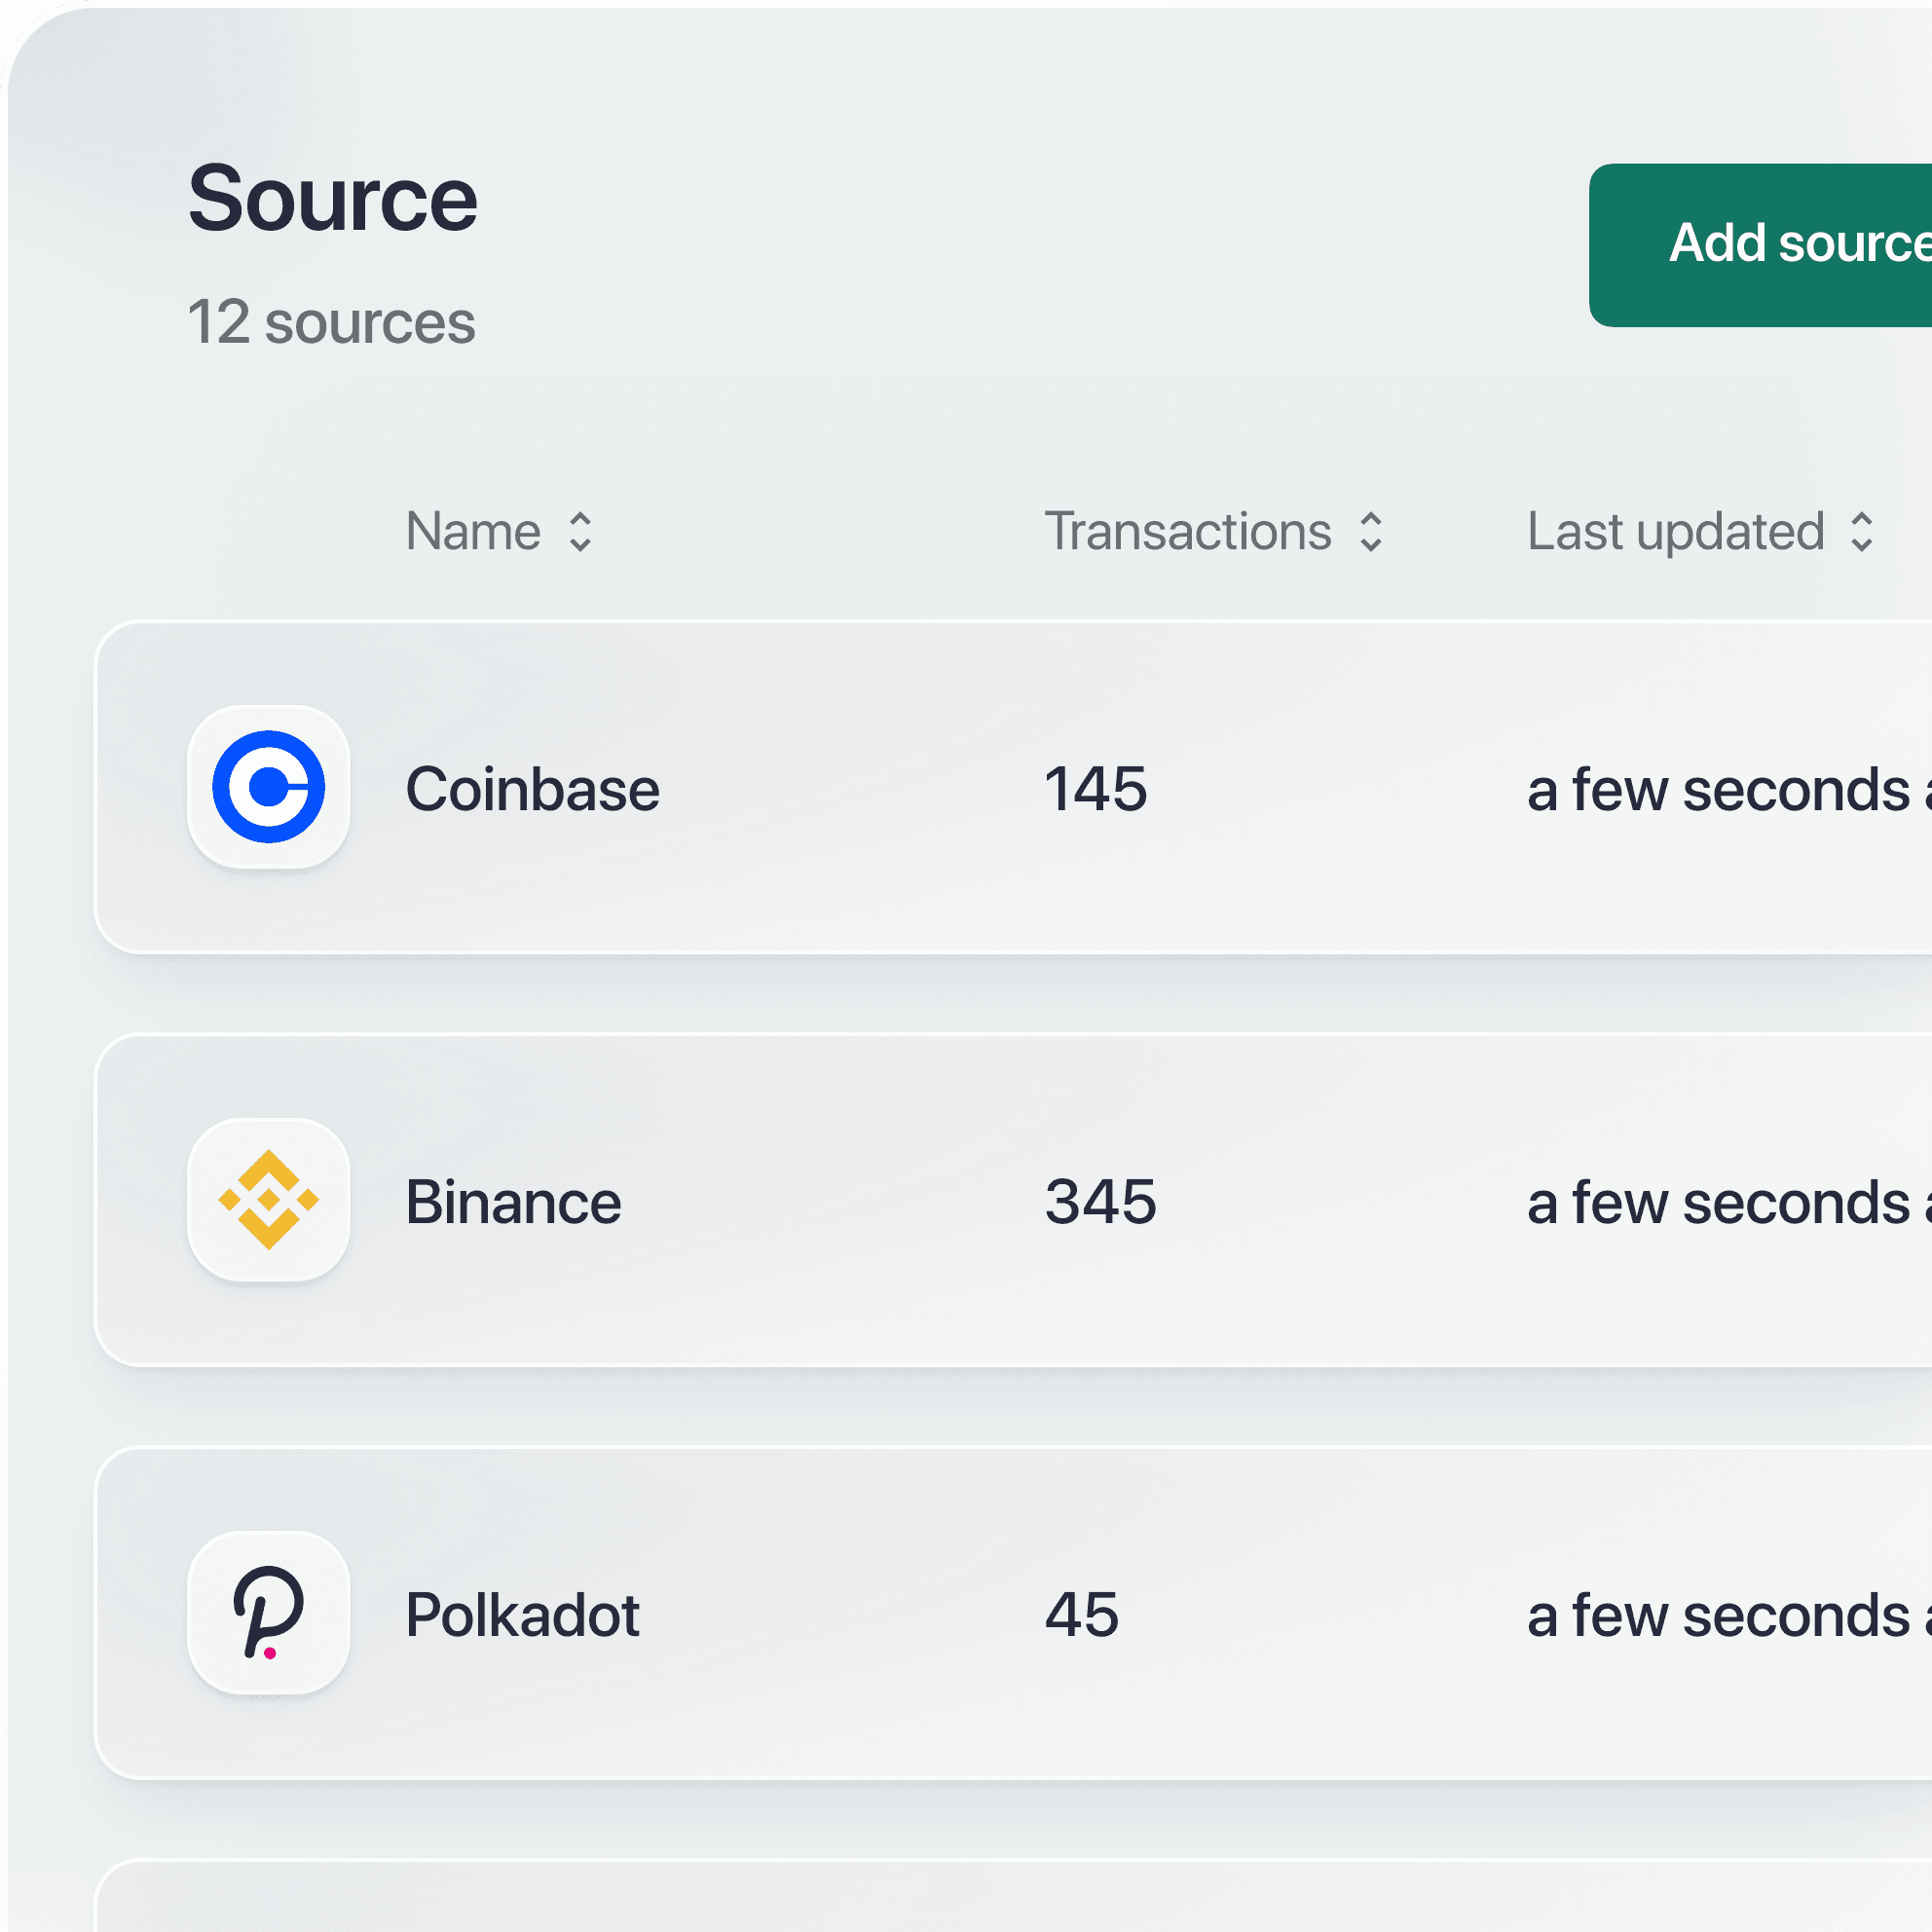 Table containing three transaction sources available in Cryptio: Coinbase, Binance and Polkadot.